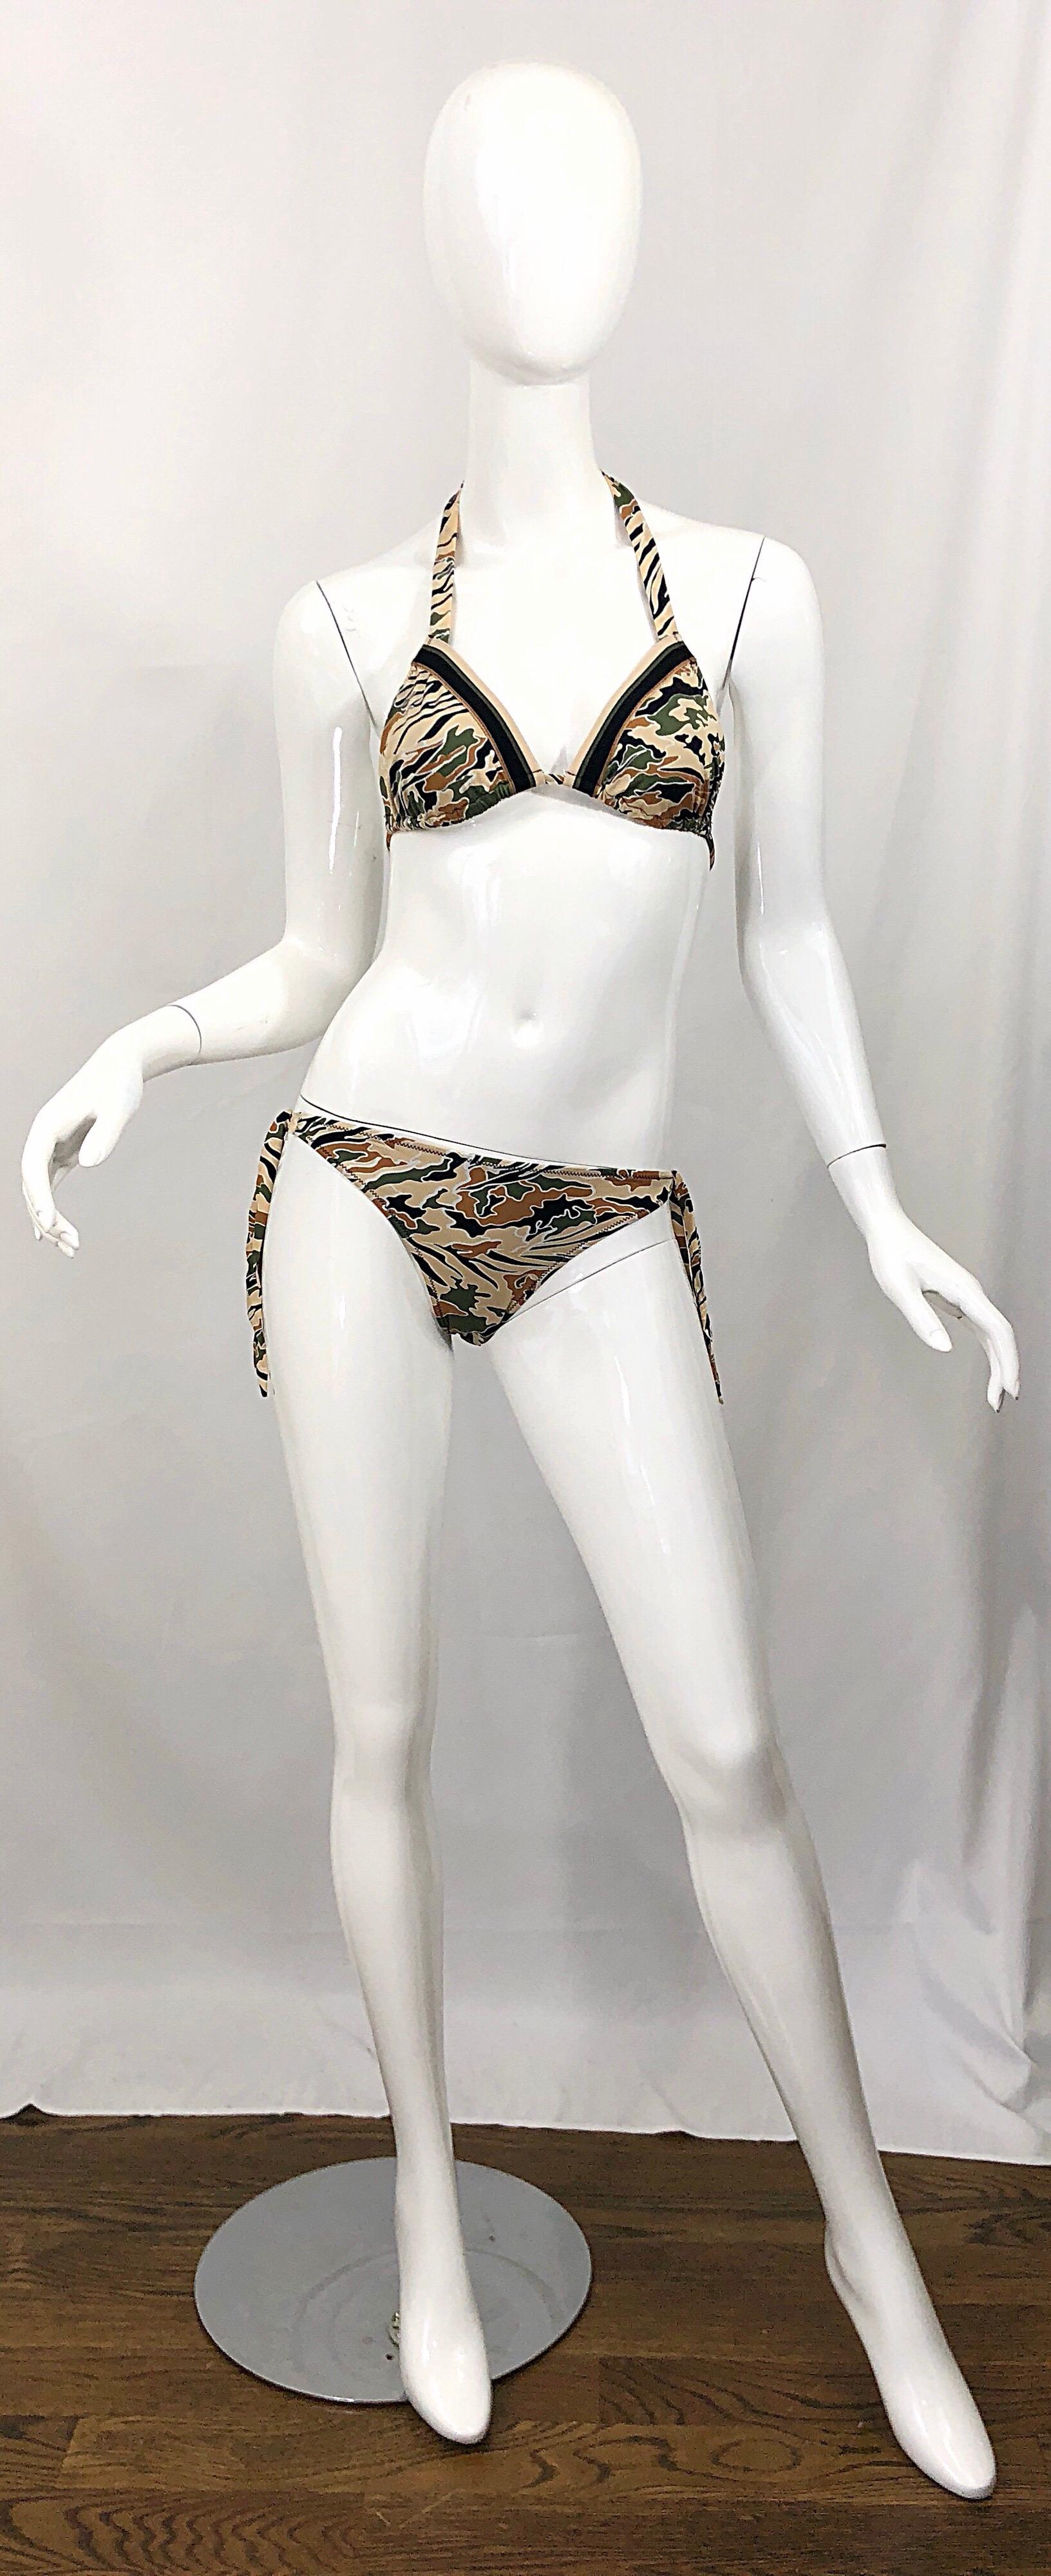 Sexy new with tags (NWT) LA PERLA camouflage triangle top low rise two piece swimsuit bikini! Elegant triangle bikini top with soft ruched cups. Adjustable straps lift and hold for an impeccable fit. Understated bikini briefs with a contemporary